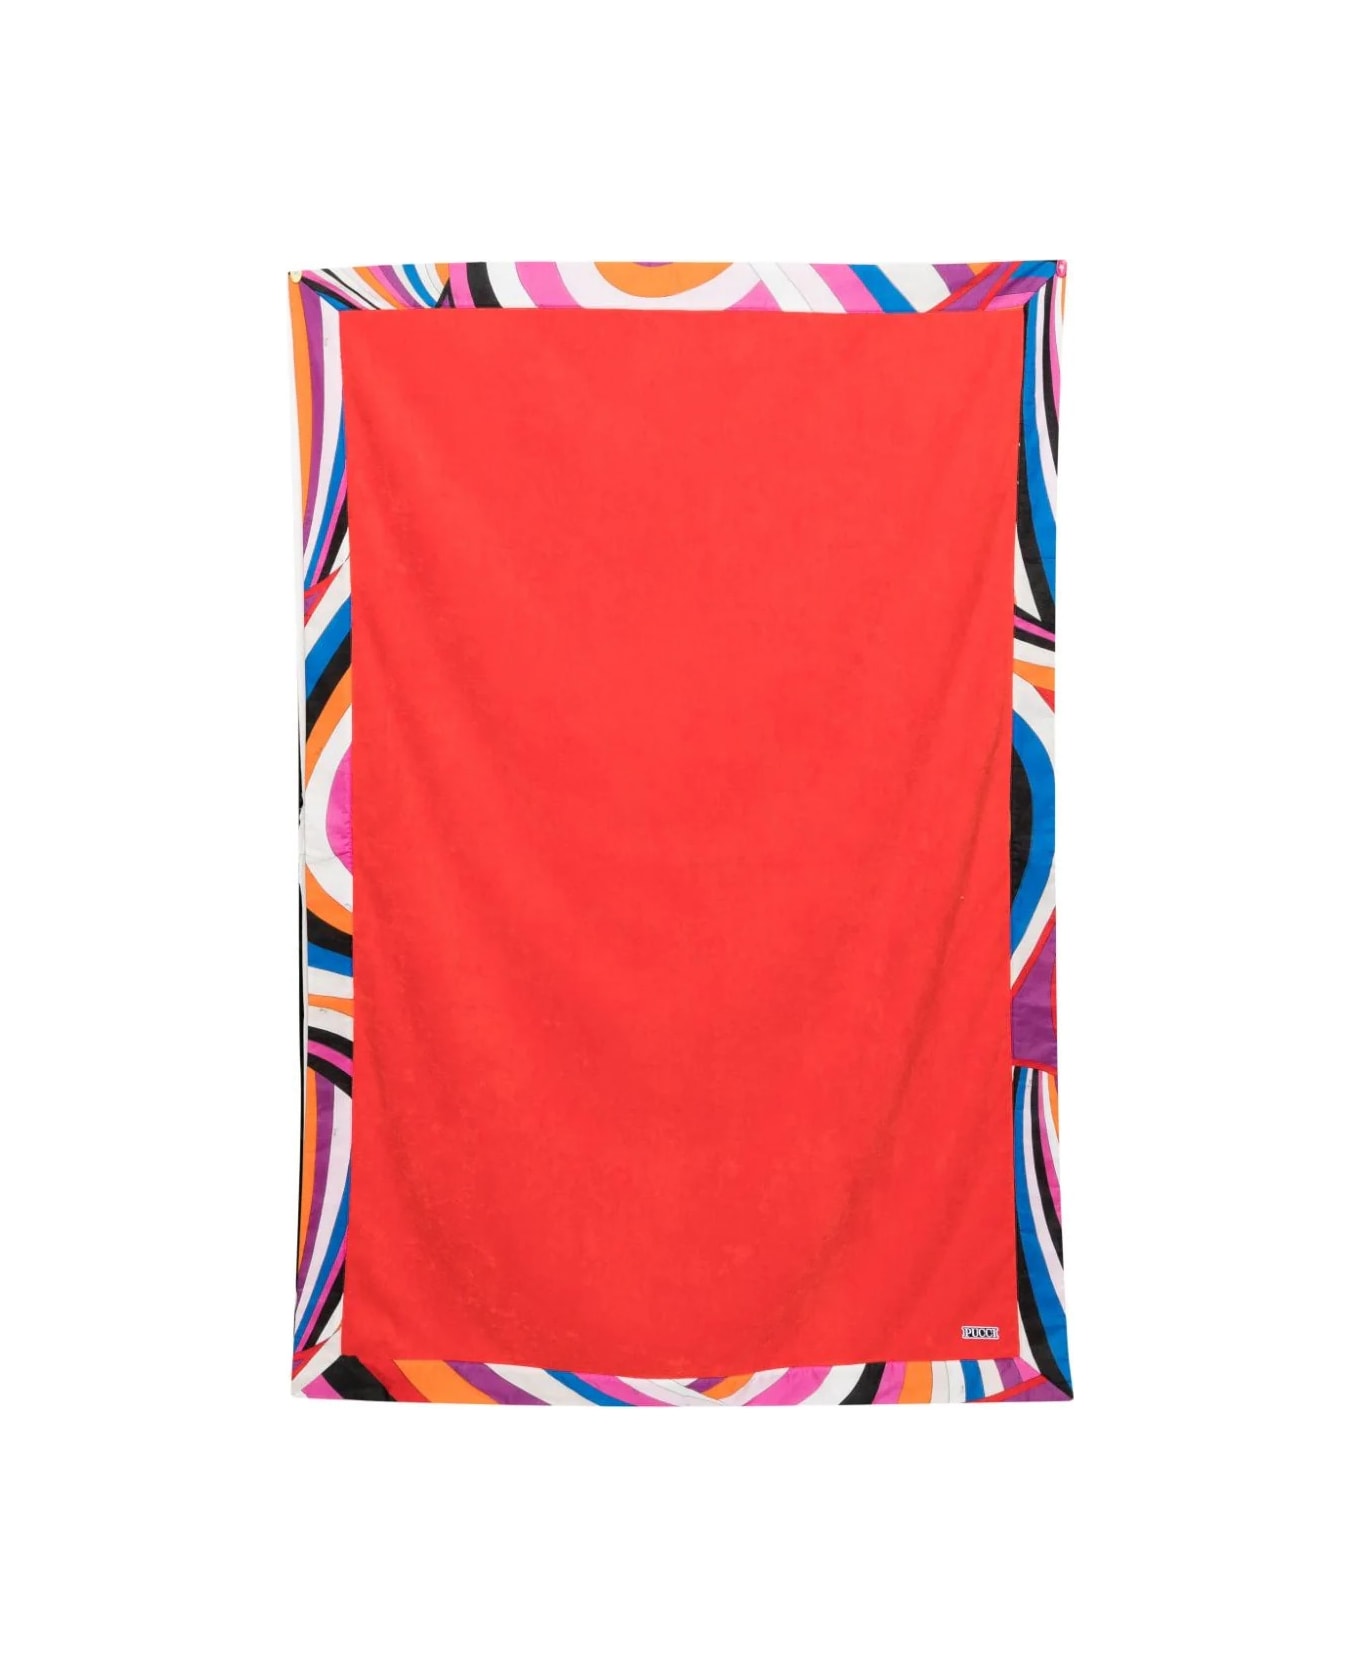 Pucci Red Beach Towel With Iride Print Border - Red